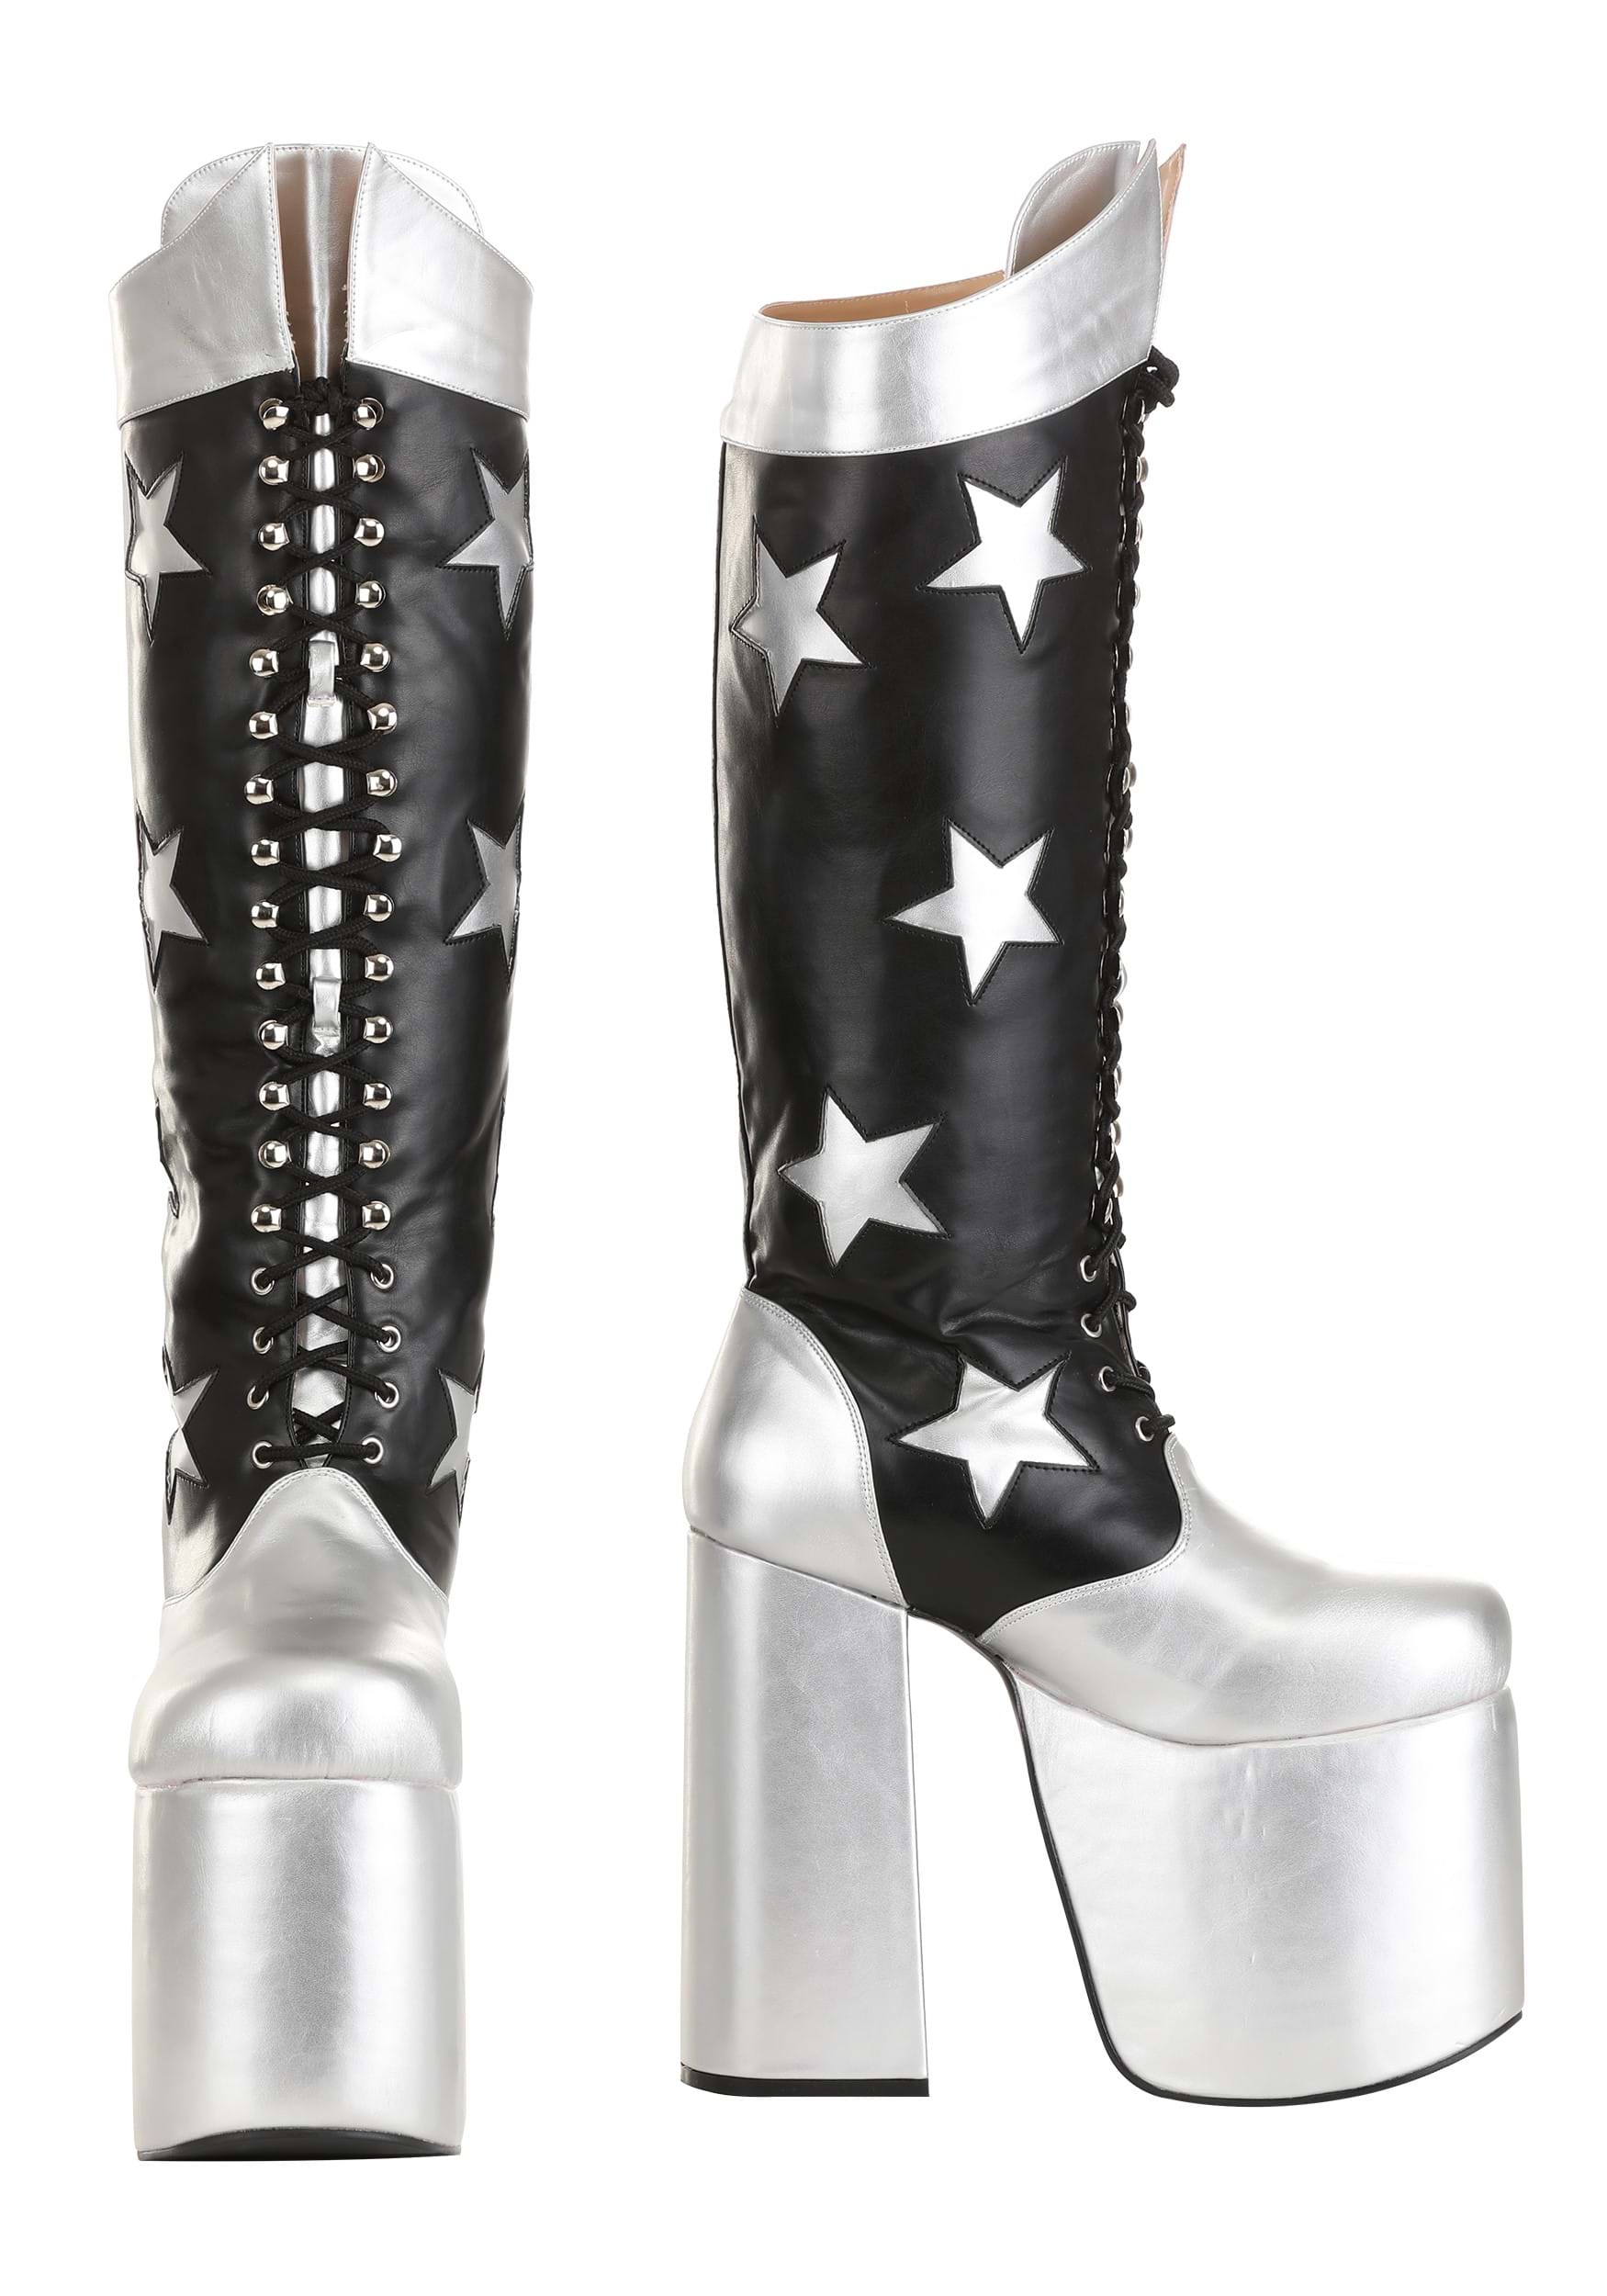 Image of KISS Starchild Boots | Exclusive Costume Boots ID FUN1951AD-13